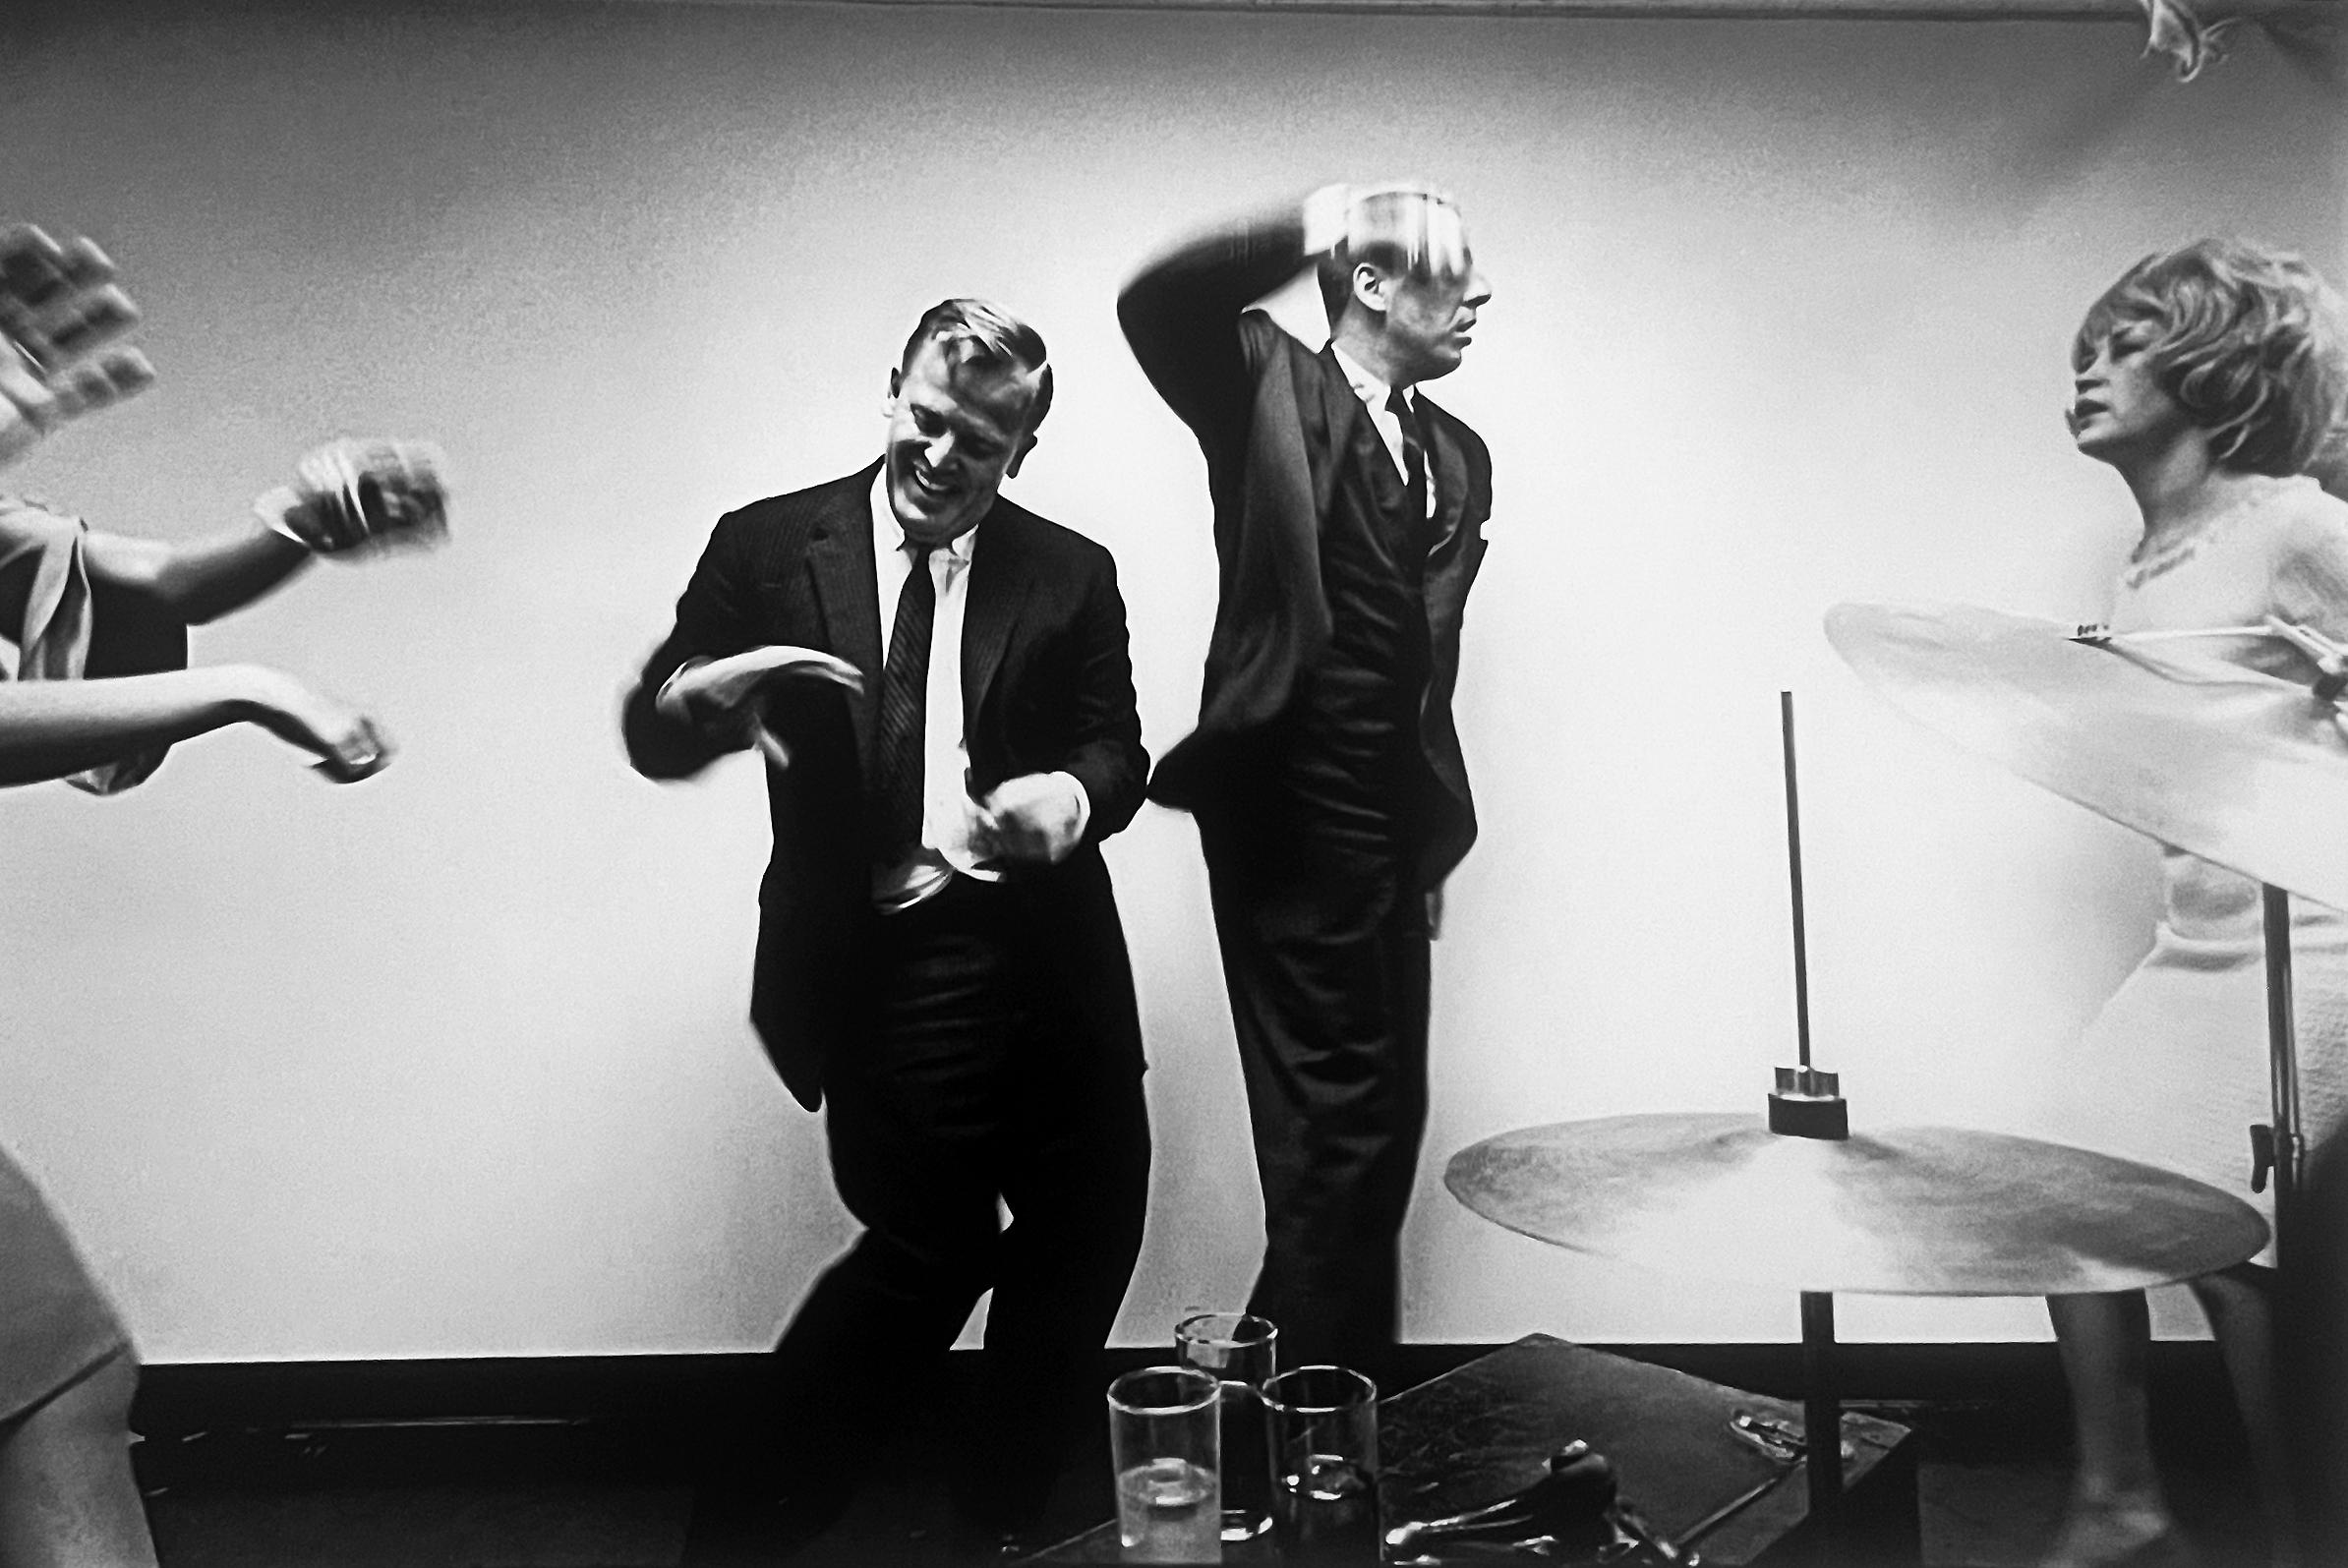 Office party, New York City, A Signed Gelatin Silver Photograph from the 1960s - Gray Black and White Photograph by Leonard Freed